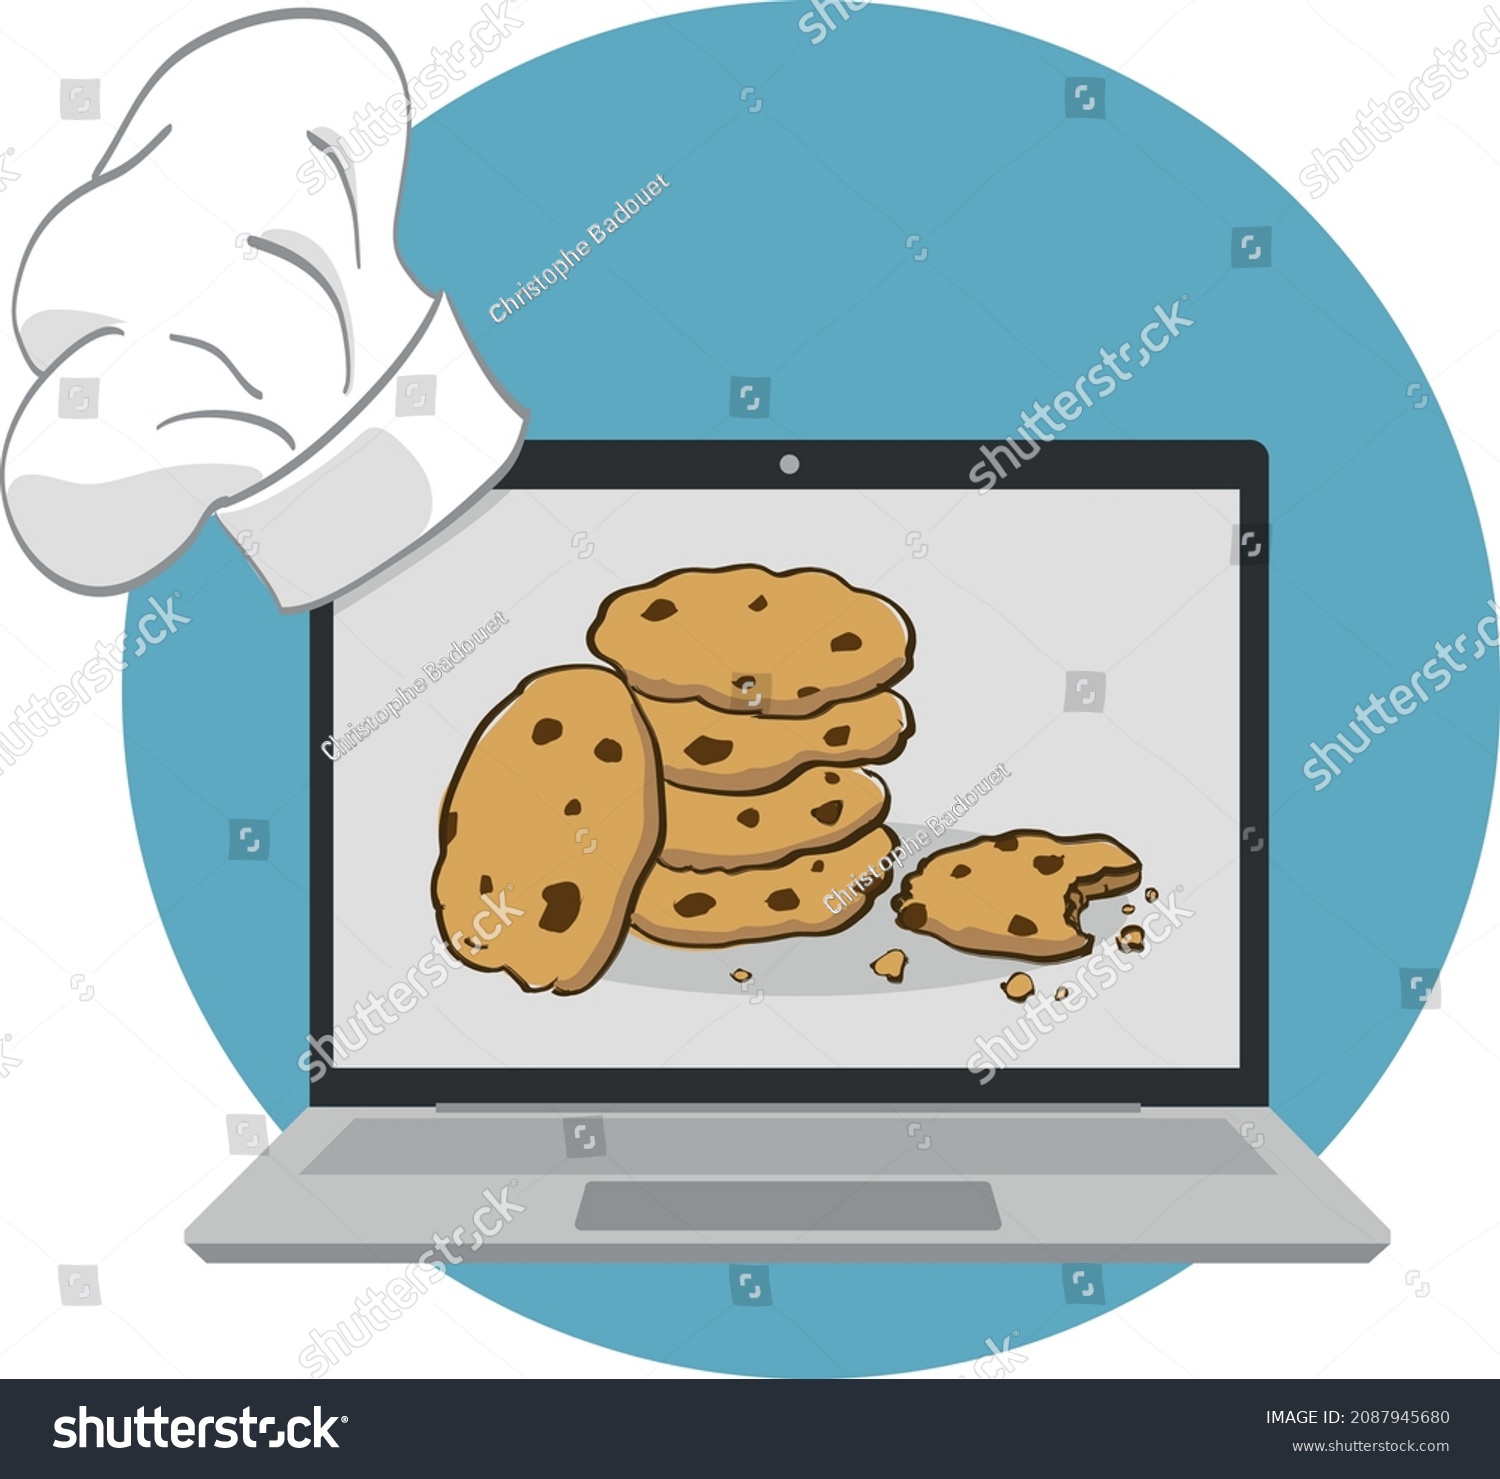 SVG of funny vector illustration of website cookies policy. a laptop displays cookies and a pastry chef's hat is placed on the screen. svg